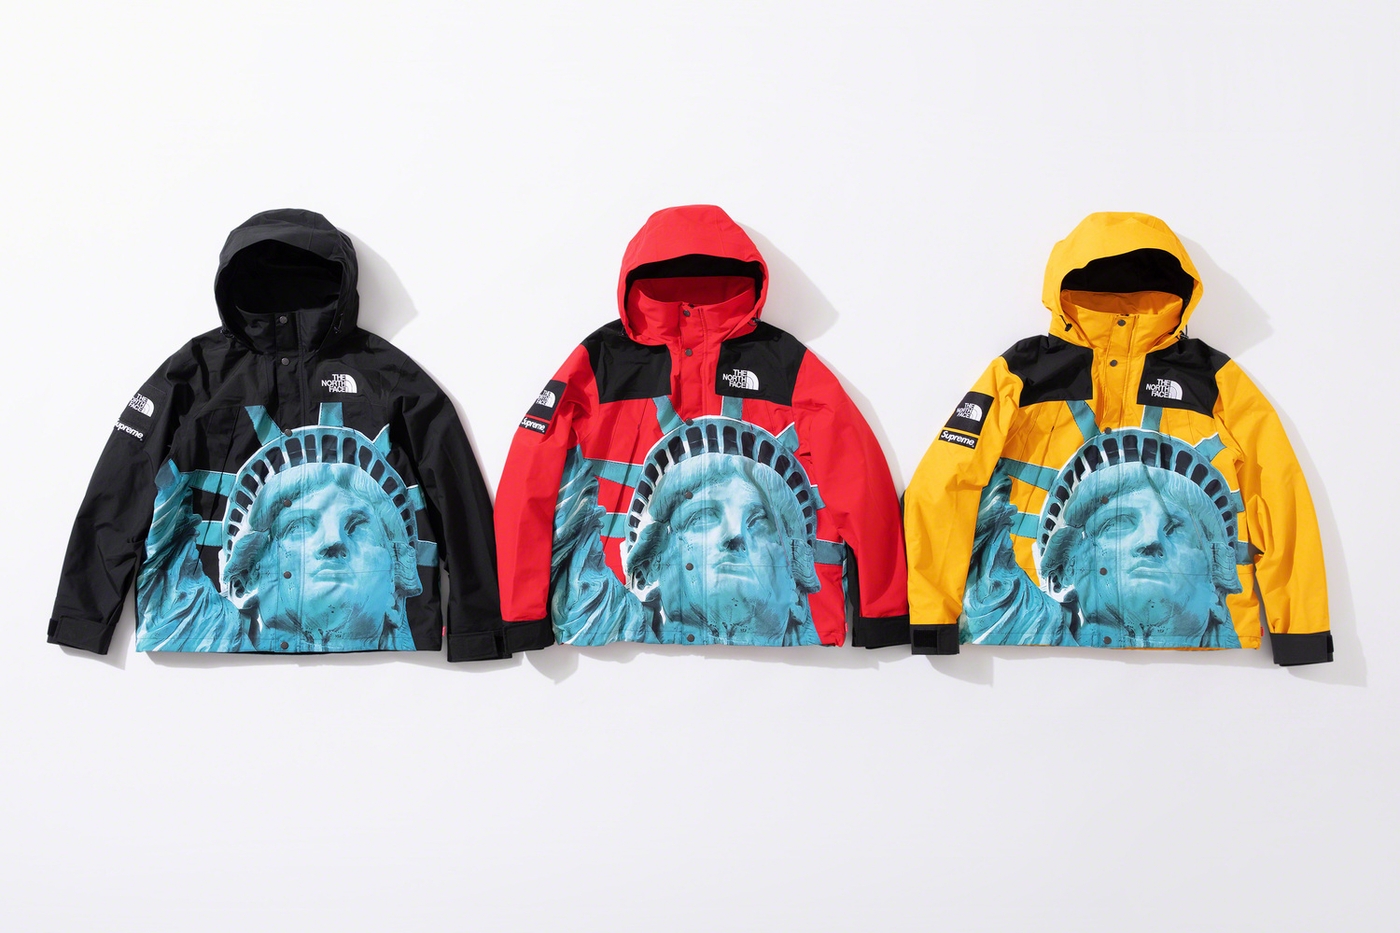 Statue of Liberty Mountain Jacket with packable hood. (22/29)